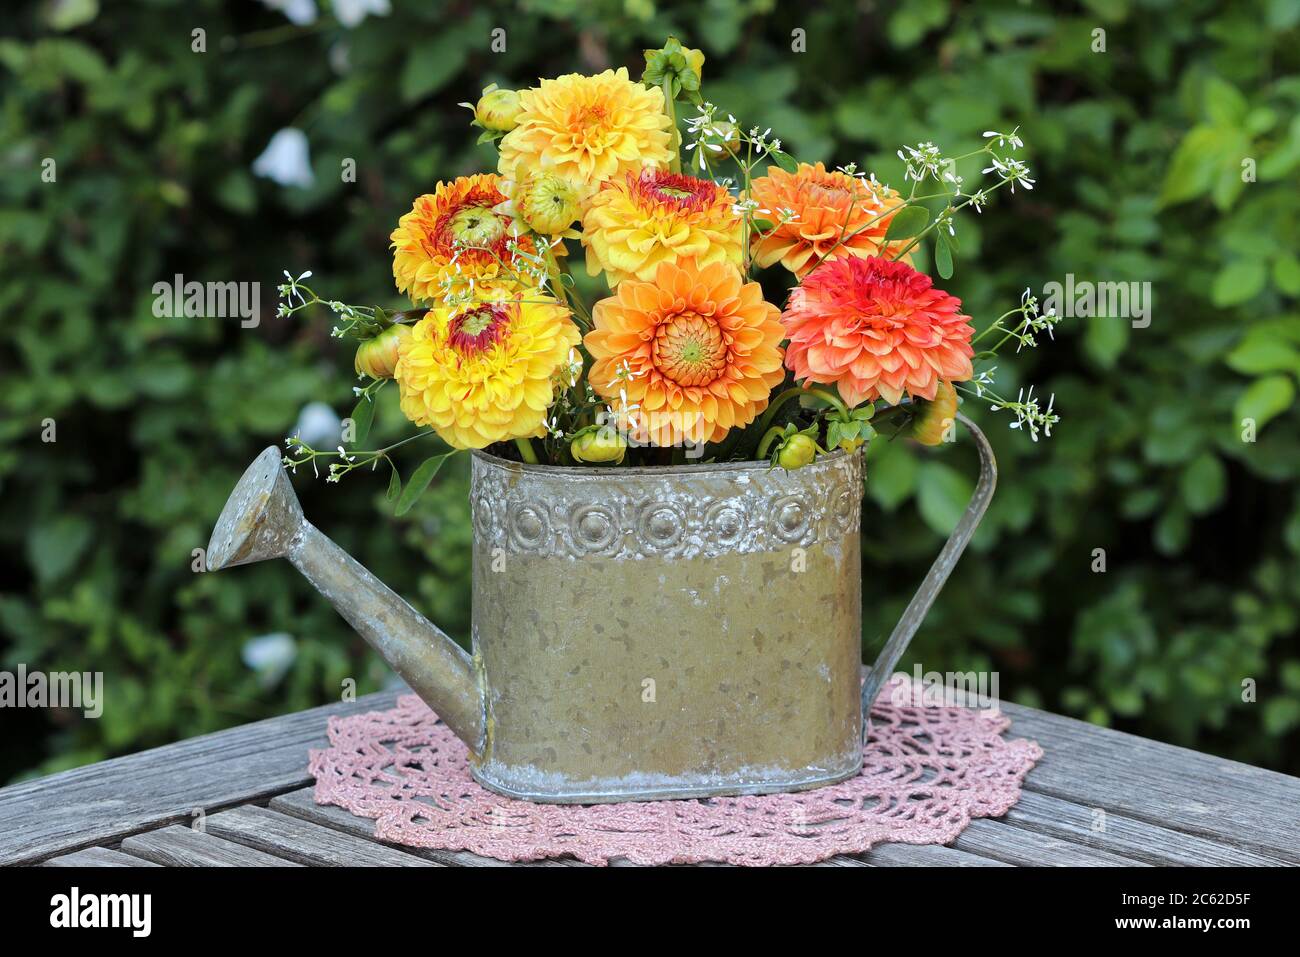 bouquet of dahlia flowers in yellow and orange in decorative watering can Stock Photo